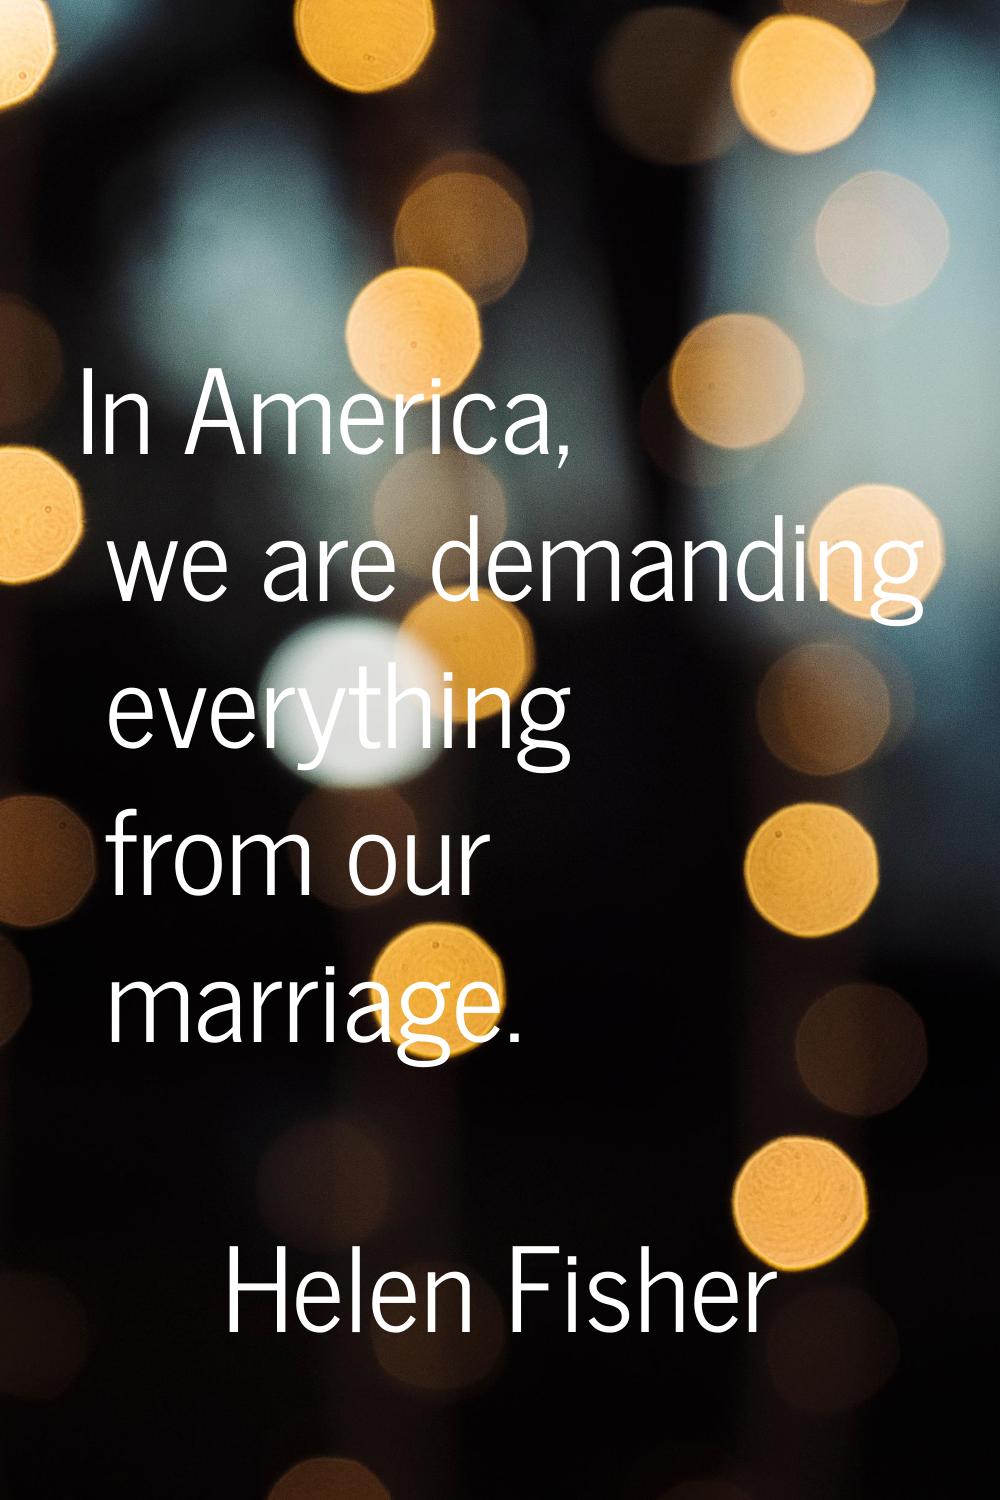 In America, we are demanding everything from our marriage.